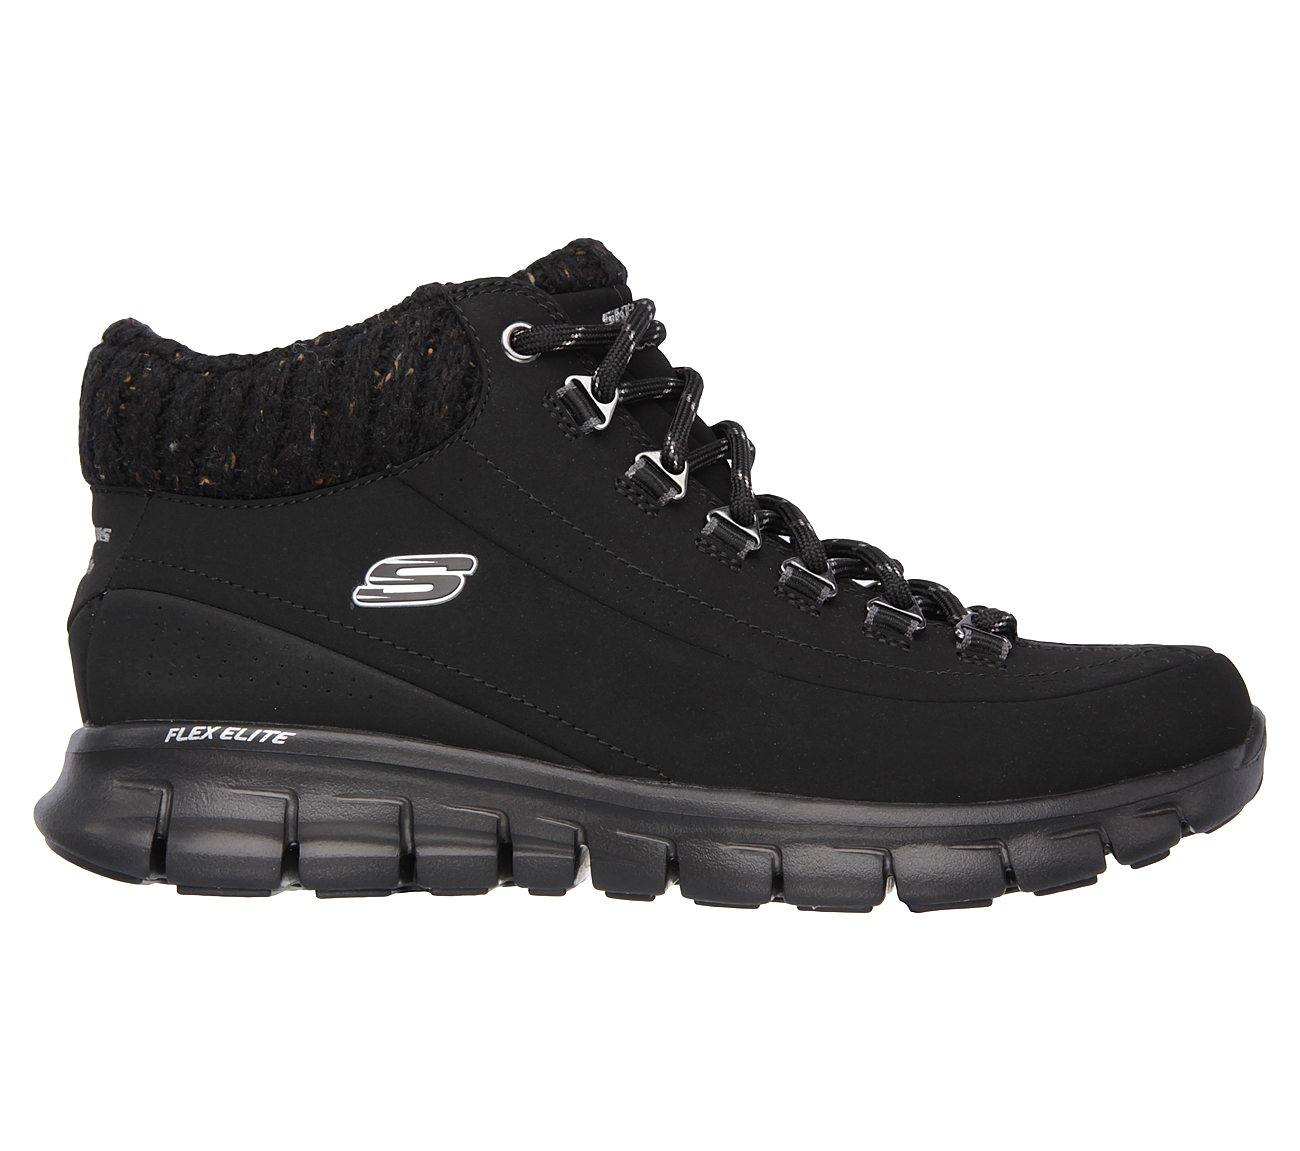 skechers boots for winter